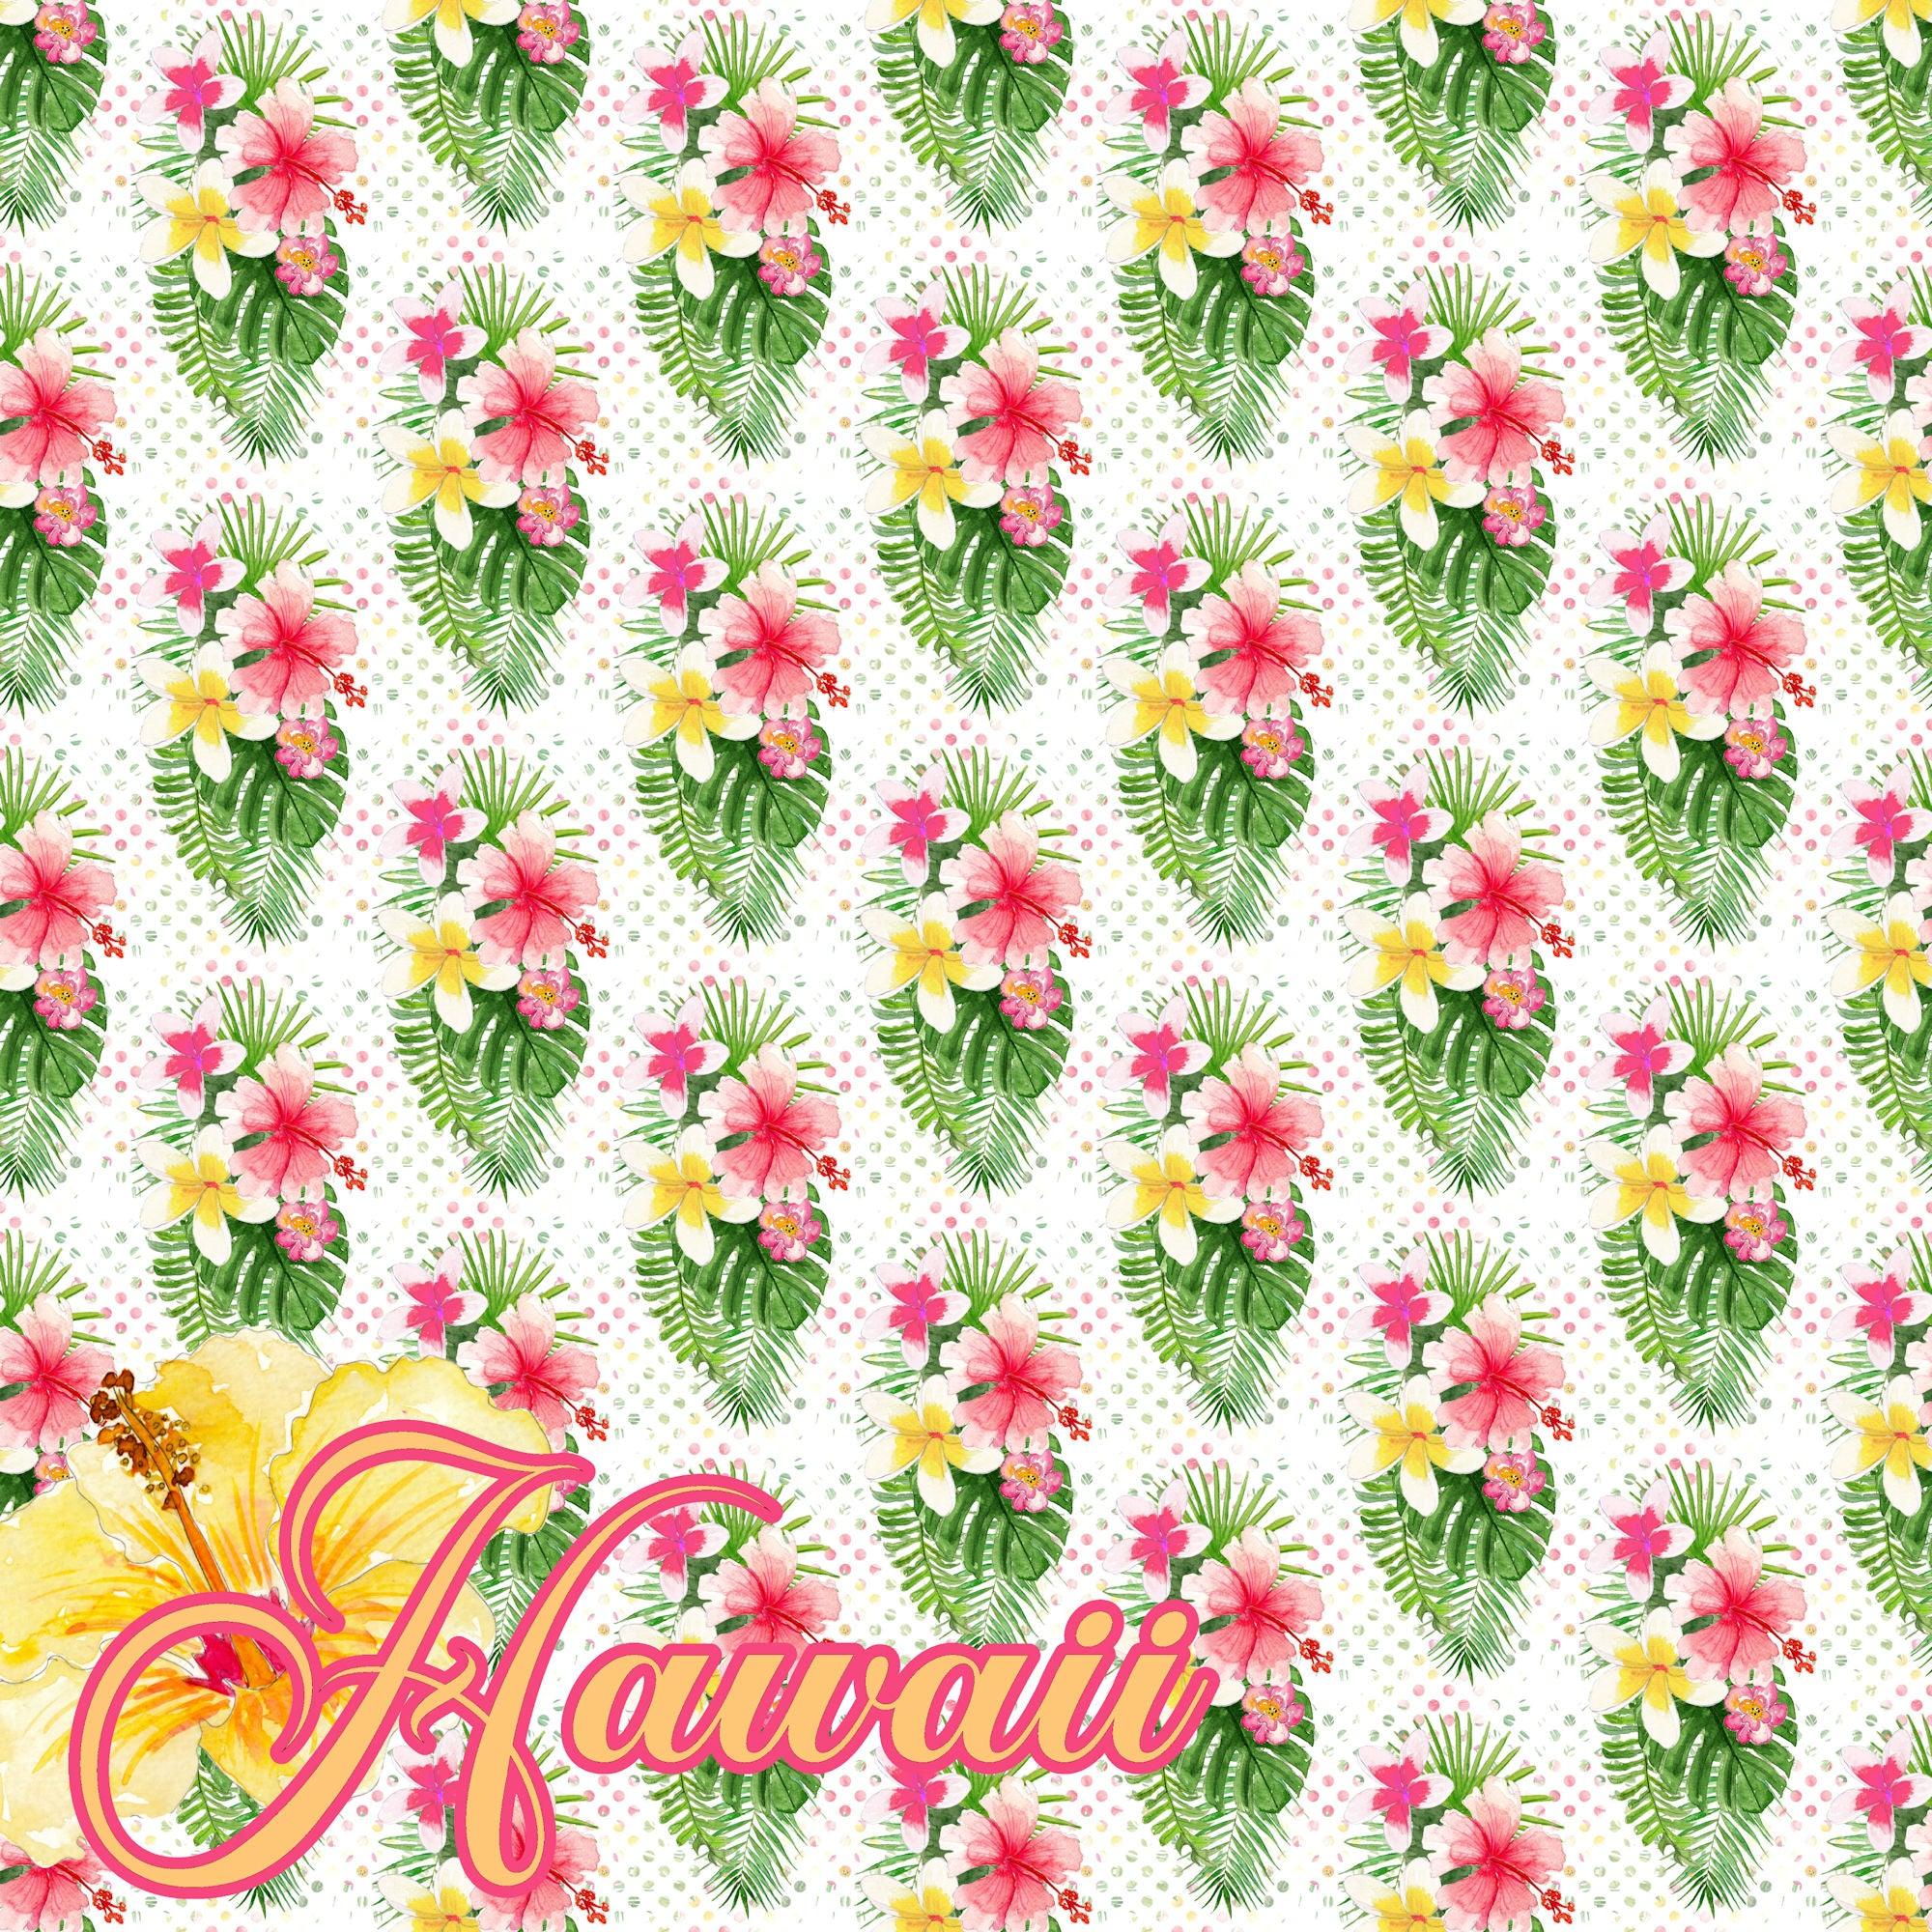 Aloha, Hawaii Collection Hawaii 12 x 12 Double-Sided Scrapbook Paper by SSC Designs - Scrapbook Supply Companies